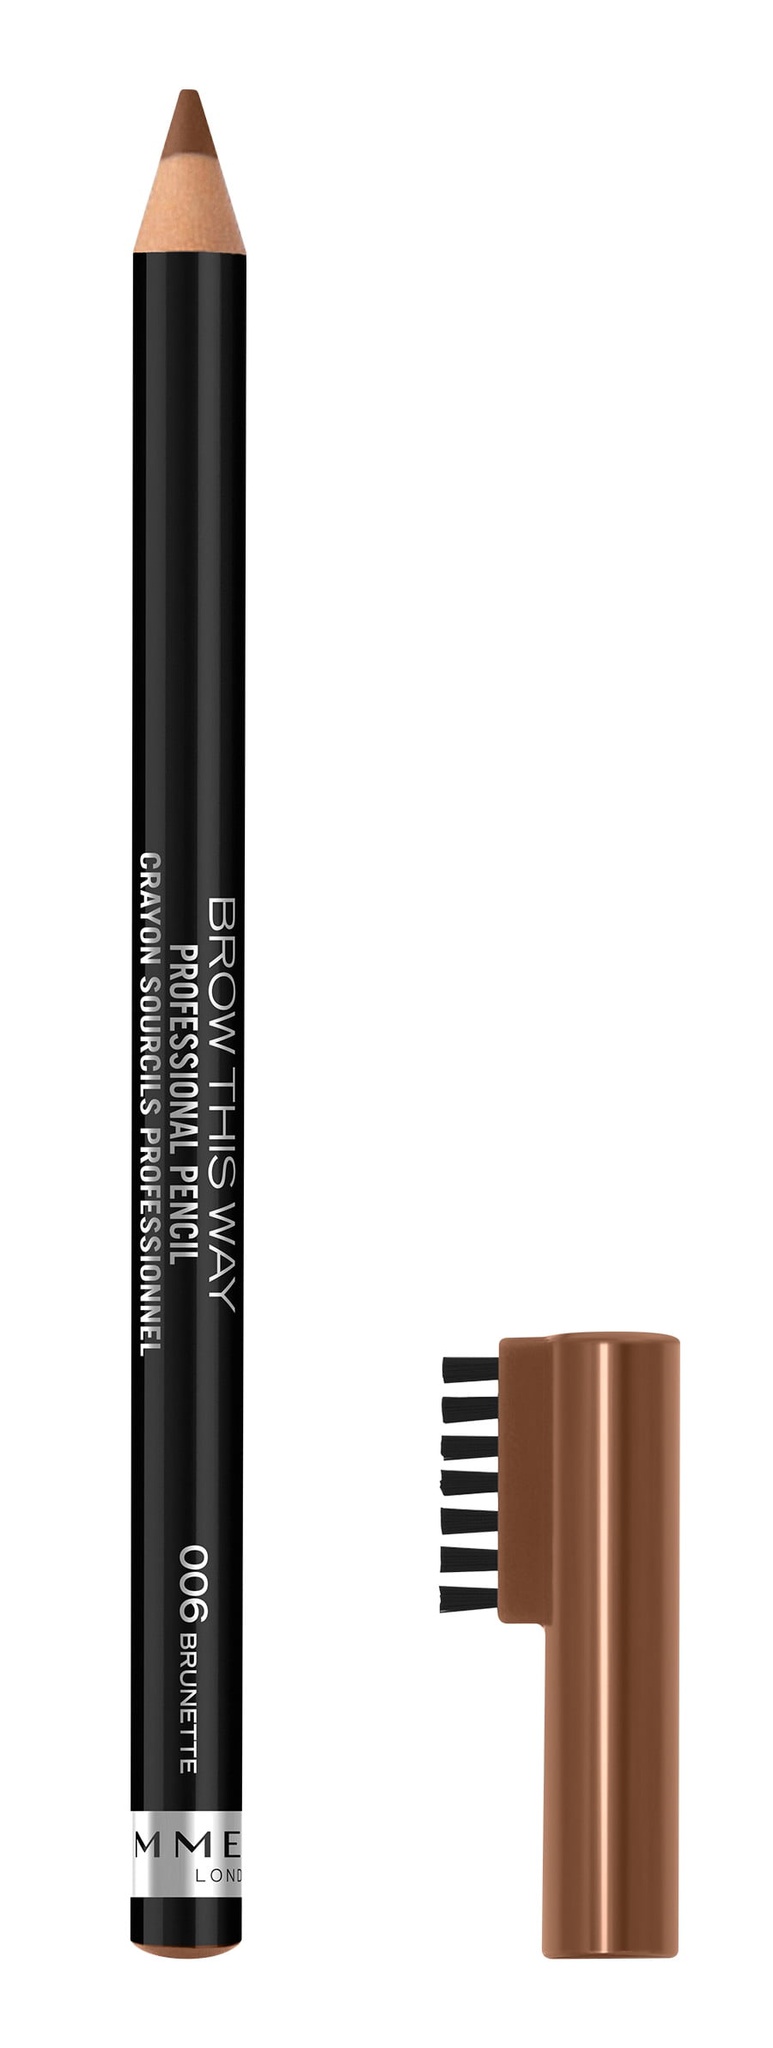 rimmel Brow This Way Professional Long Lasting Color Brow Pencil